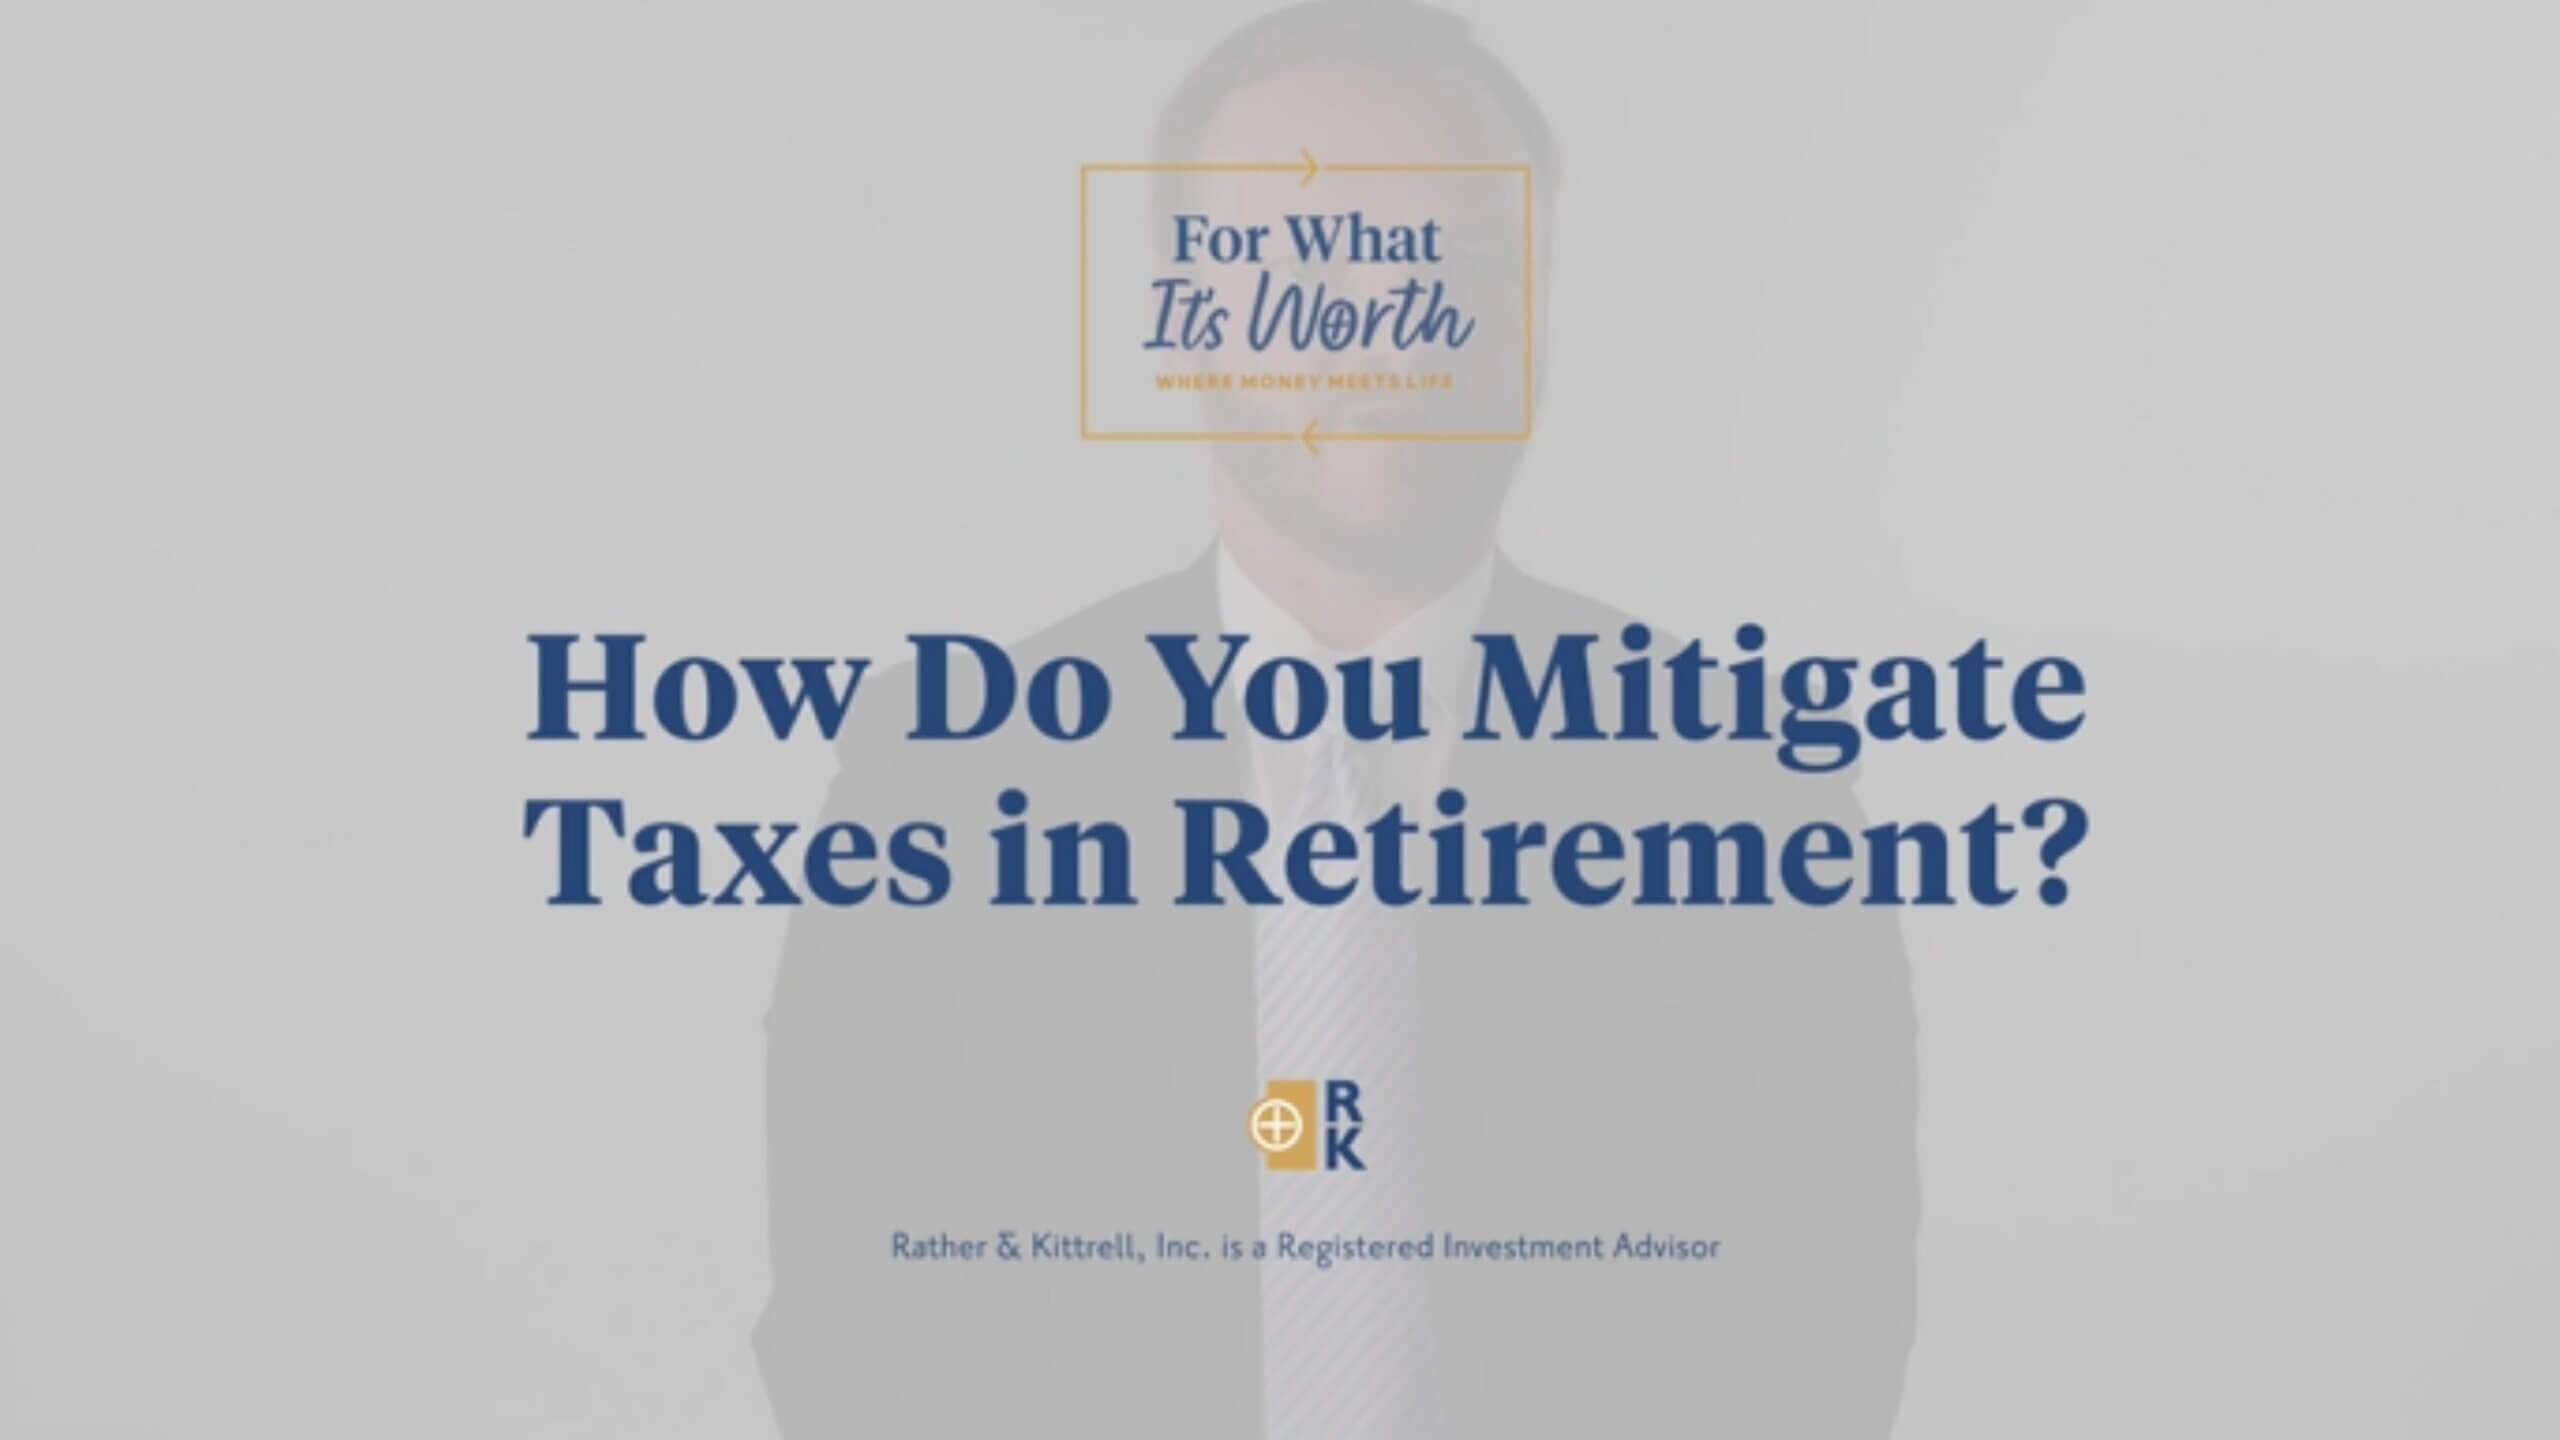 How do you mitigate taxes in retirement?